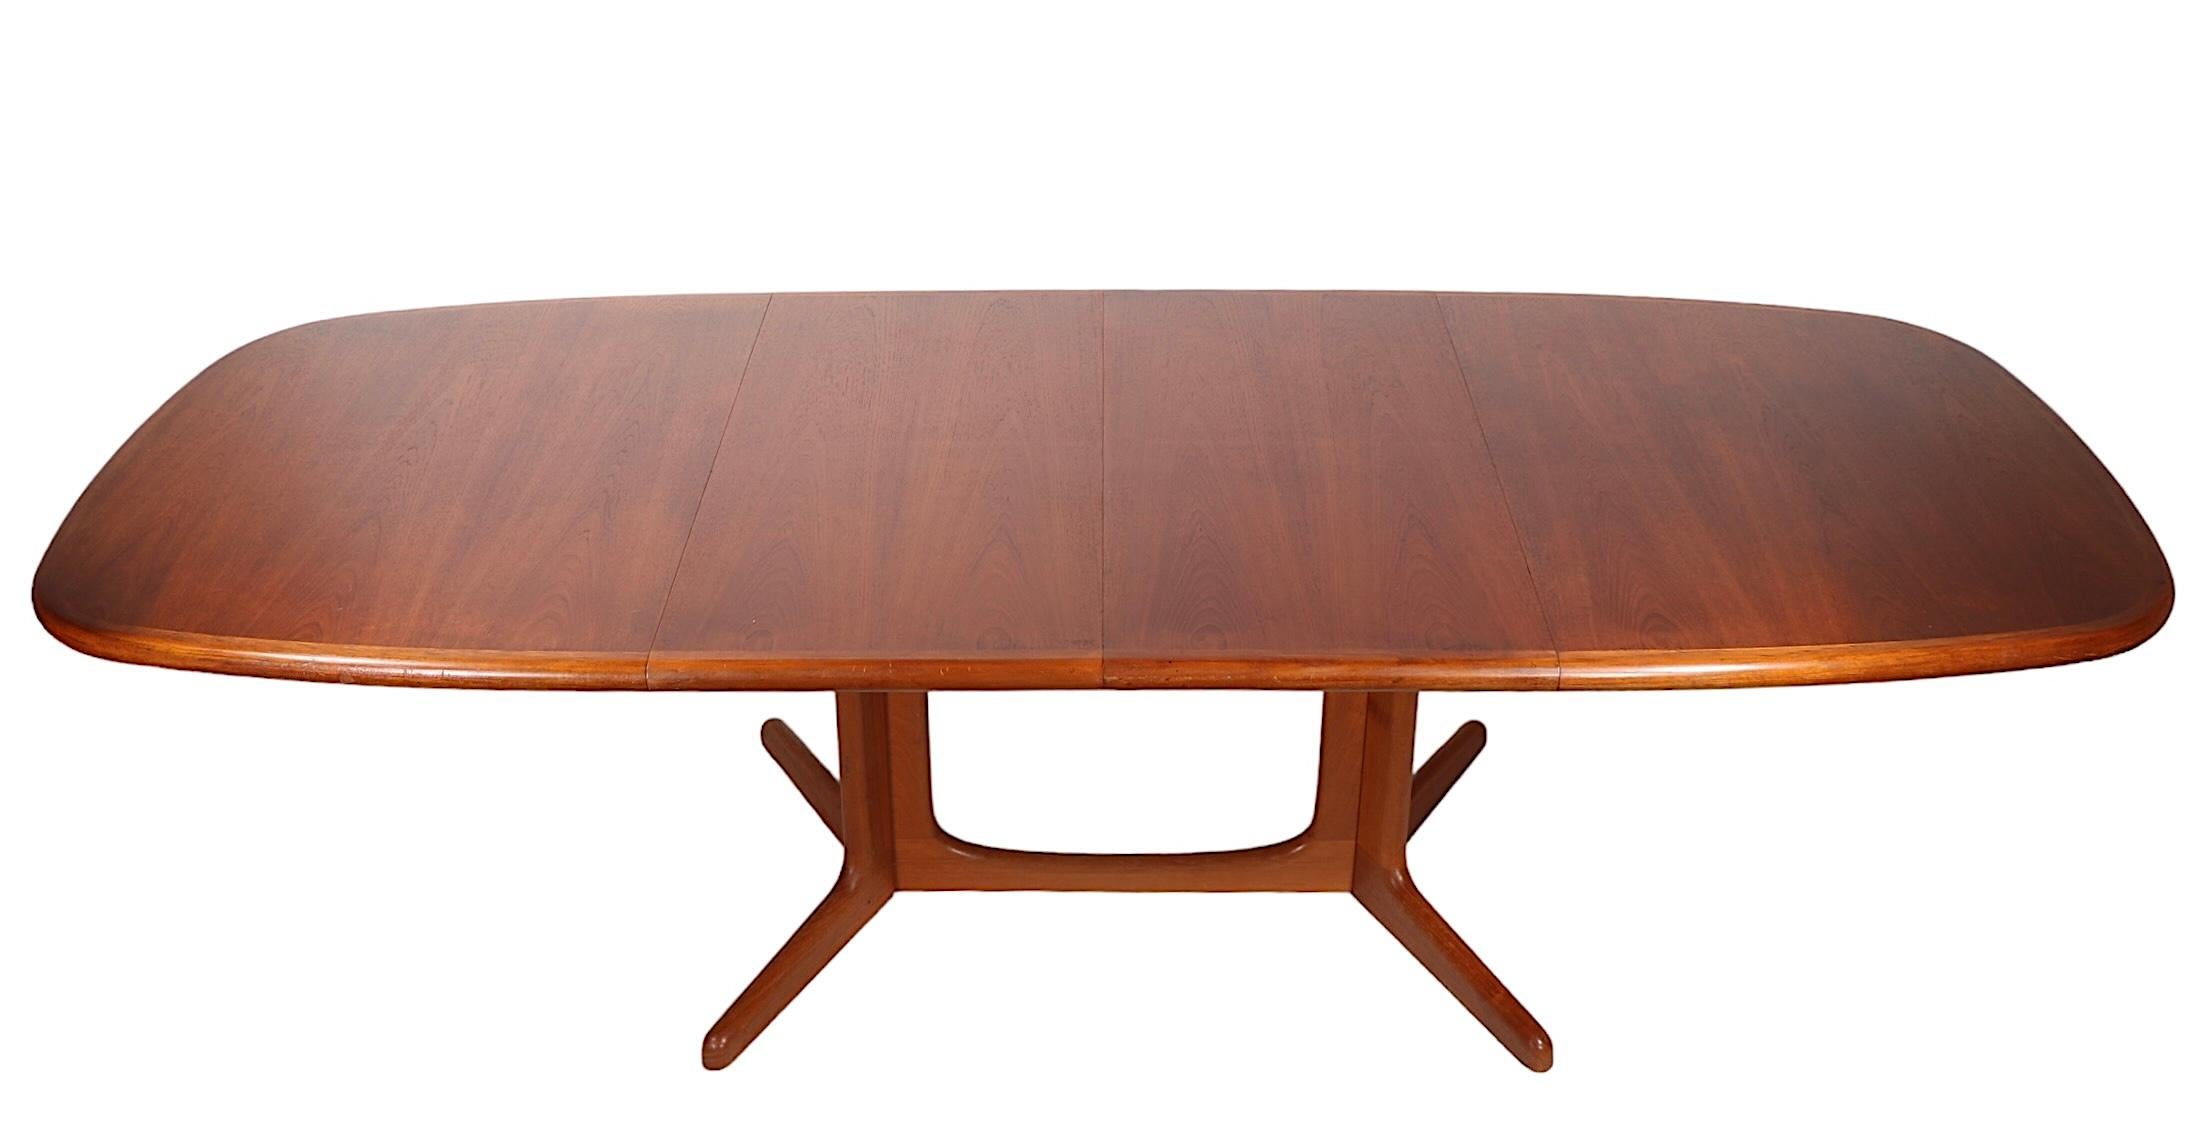 Danish Mid Century Oval Teak Dining Table by Niels Otto Moller for Gudme c 1970s For Sale 5